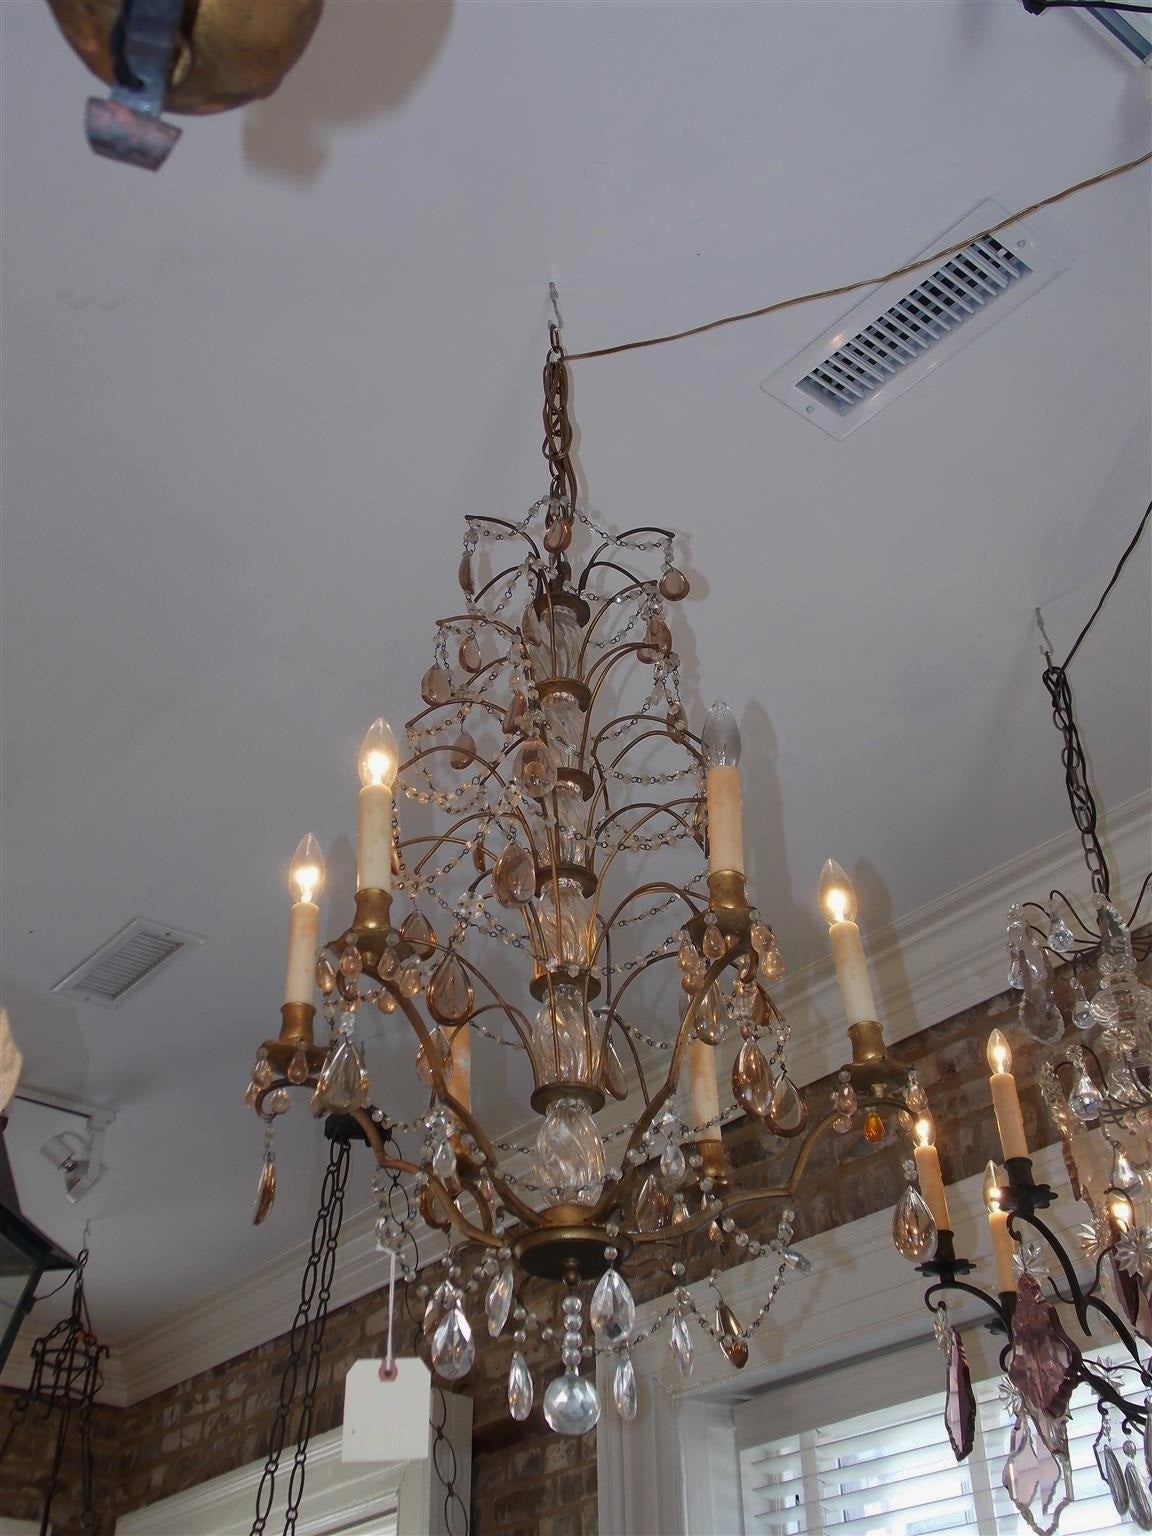 French gilt bronze and amber crystal seven tiered chandelier with centered crystal column and intertwined beading between arms.  Originally candle powered and has been electrified.  Early 19th century.